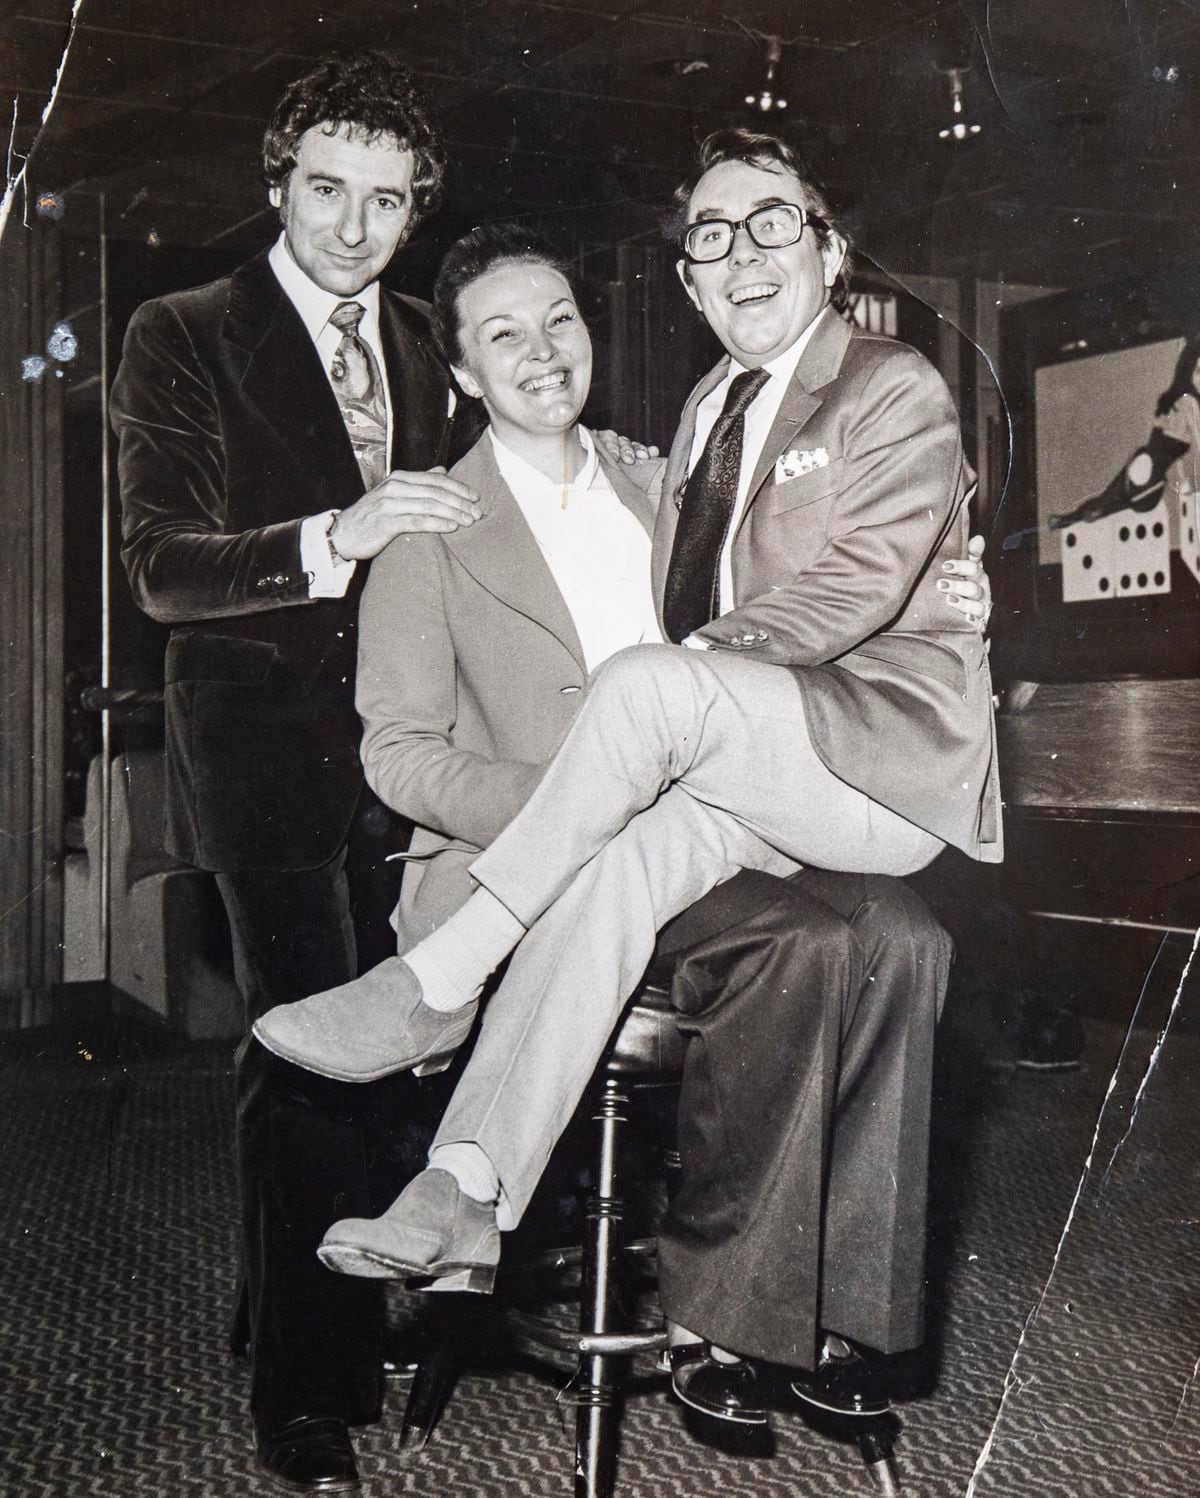 An early 70s picture of Ray Marks, left, and comedian Ronnie Corbett sitting on the knee of Margaret, the Bunny ‘mother’.